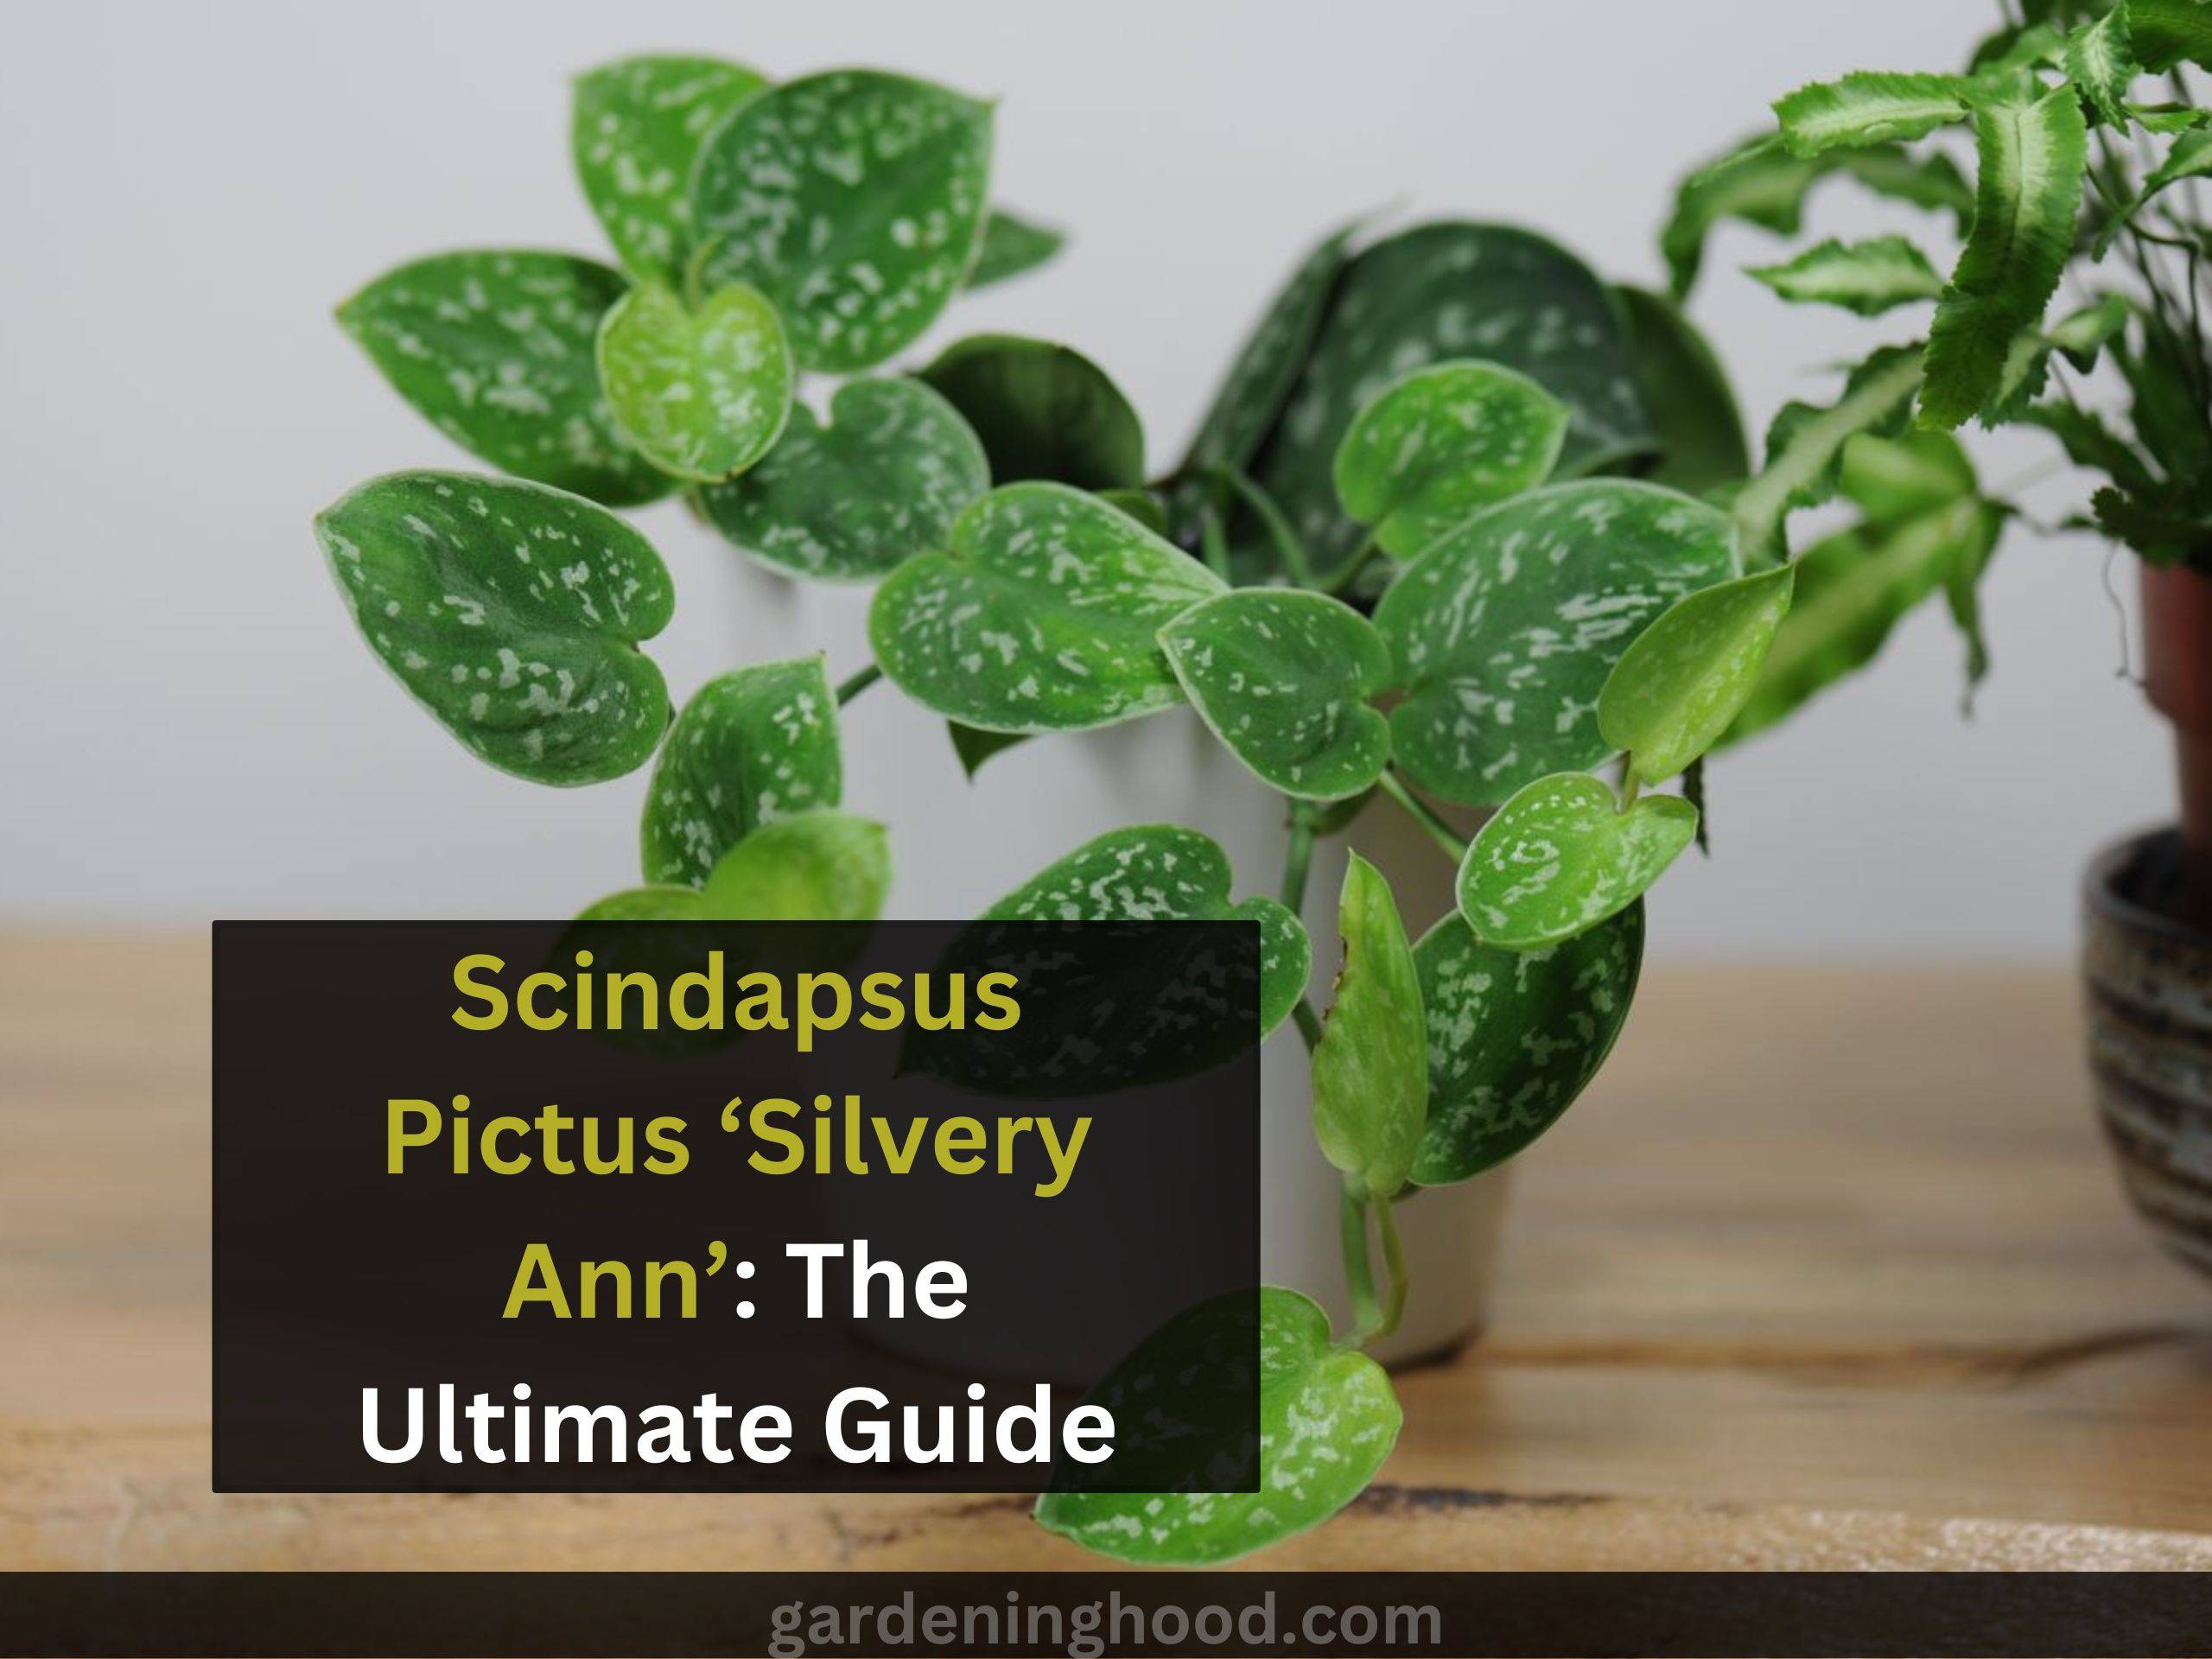 Scindapsus Pictus ‘Silvery Ann’: The Ultimate Guide